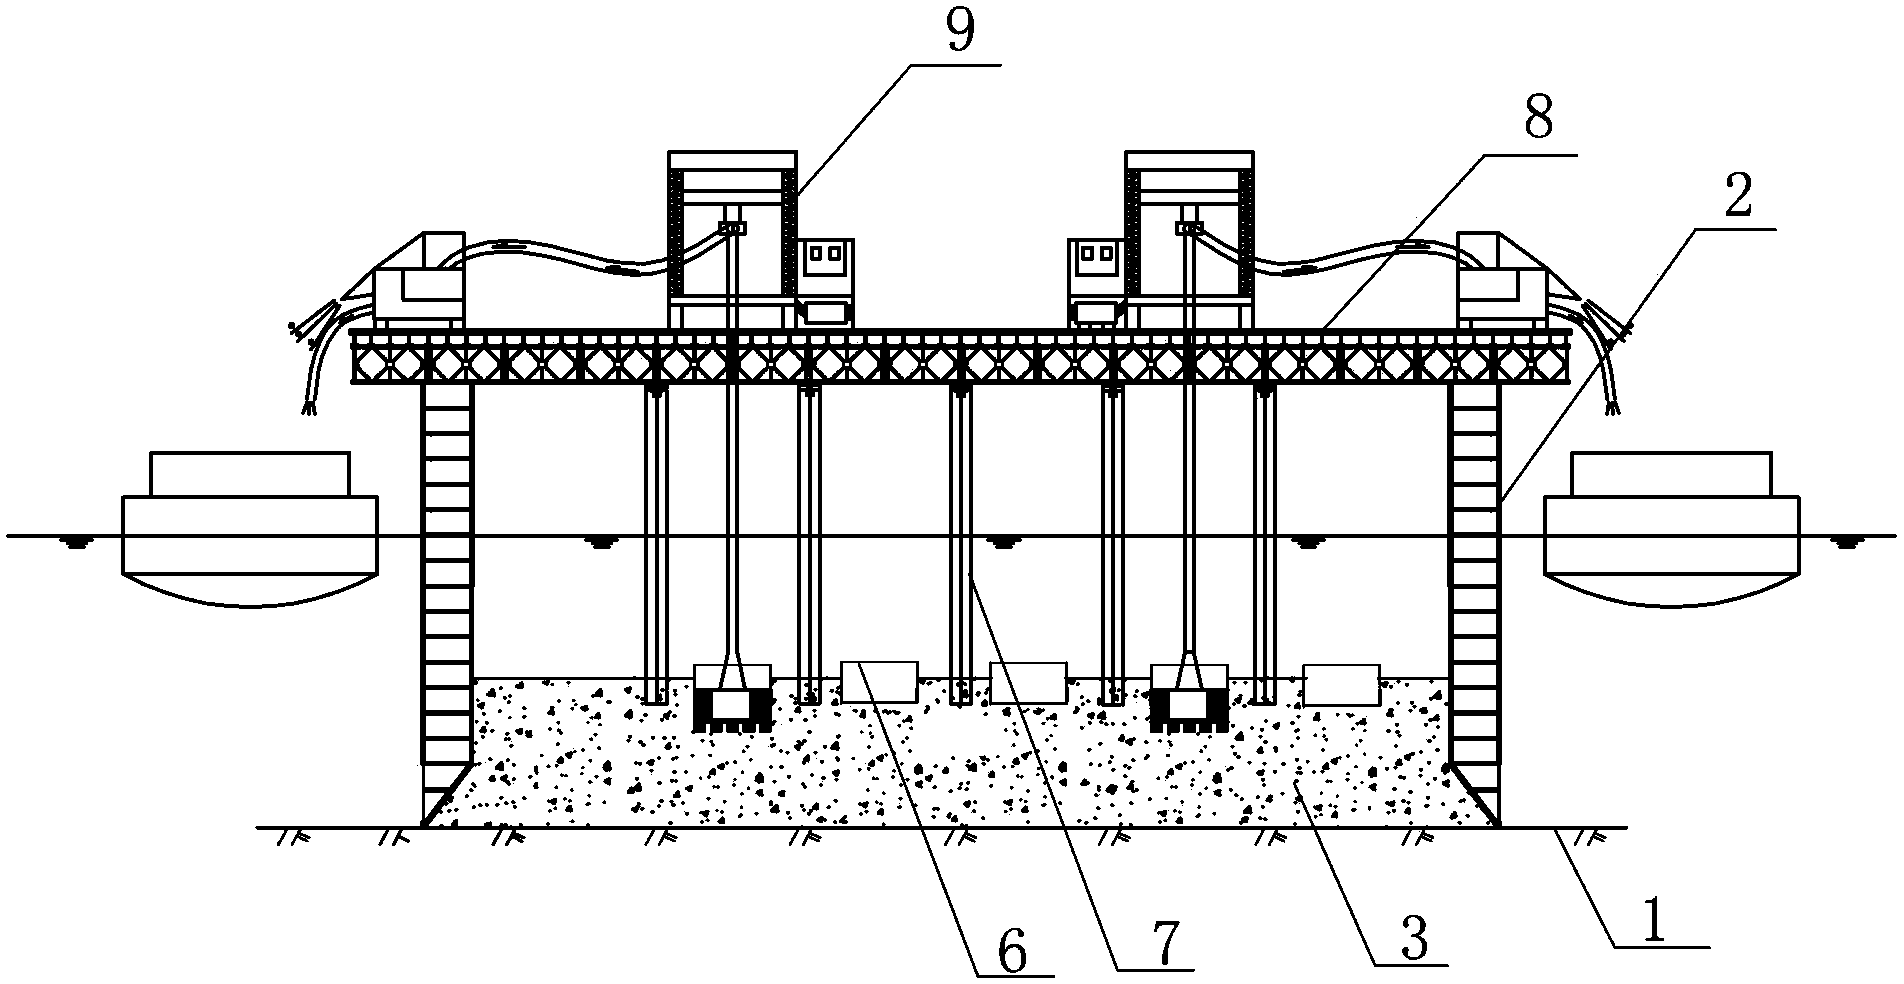 Construction method of deep water pile foundation without steel pile casings